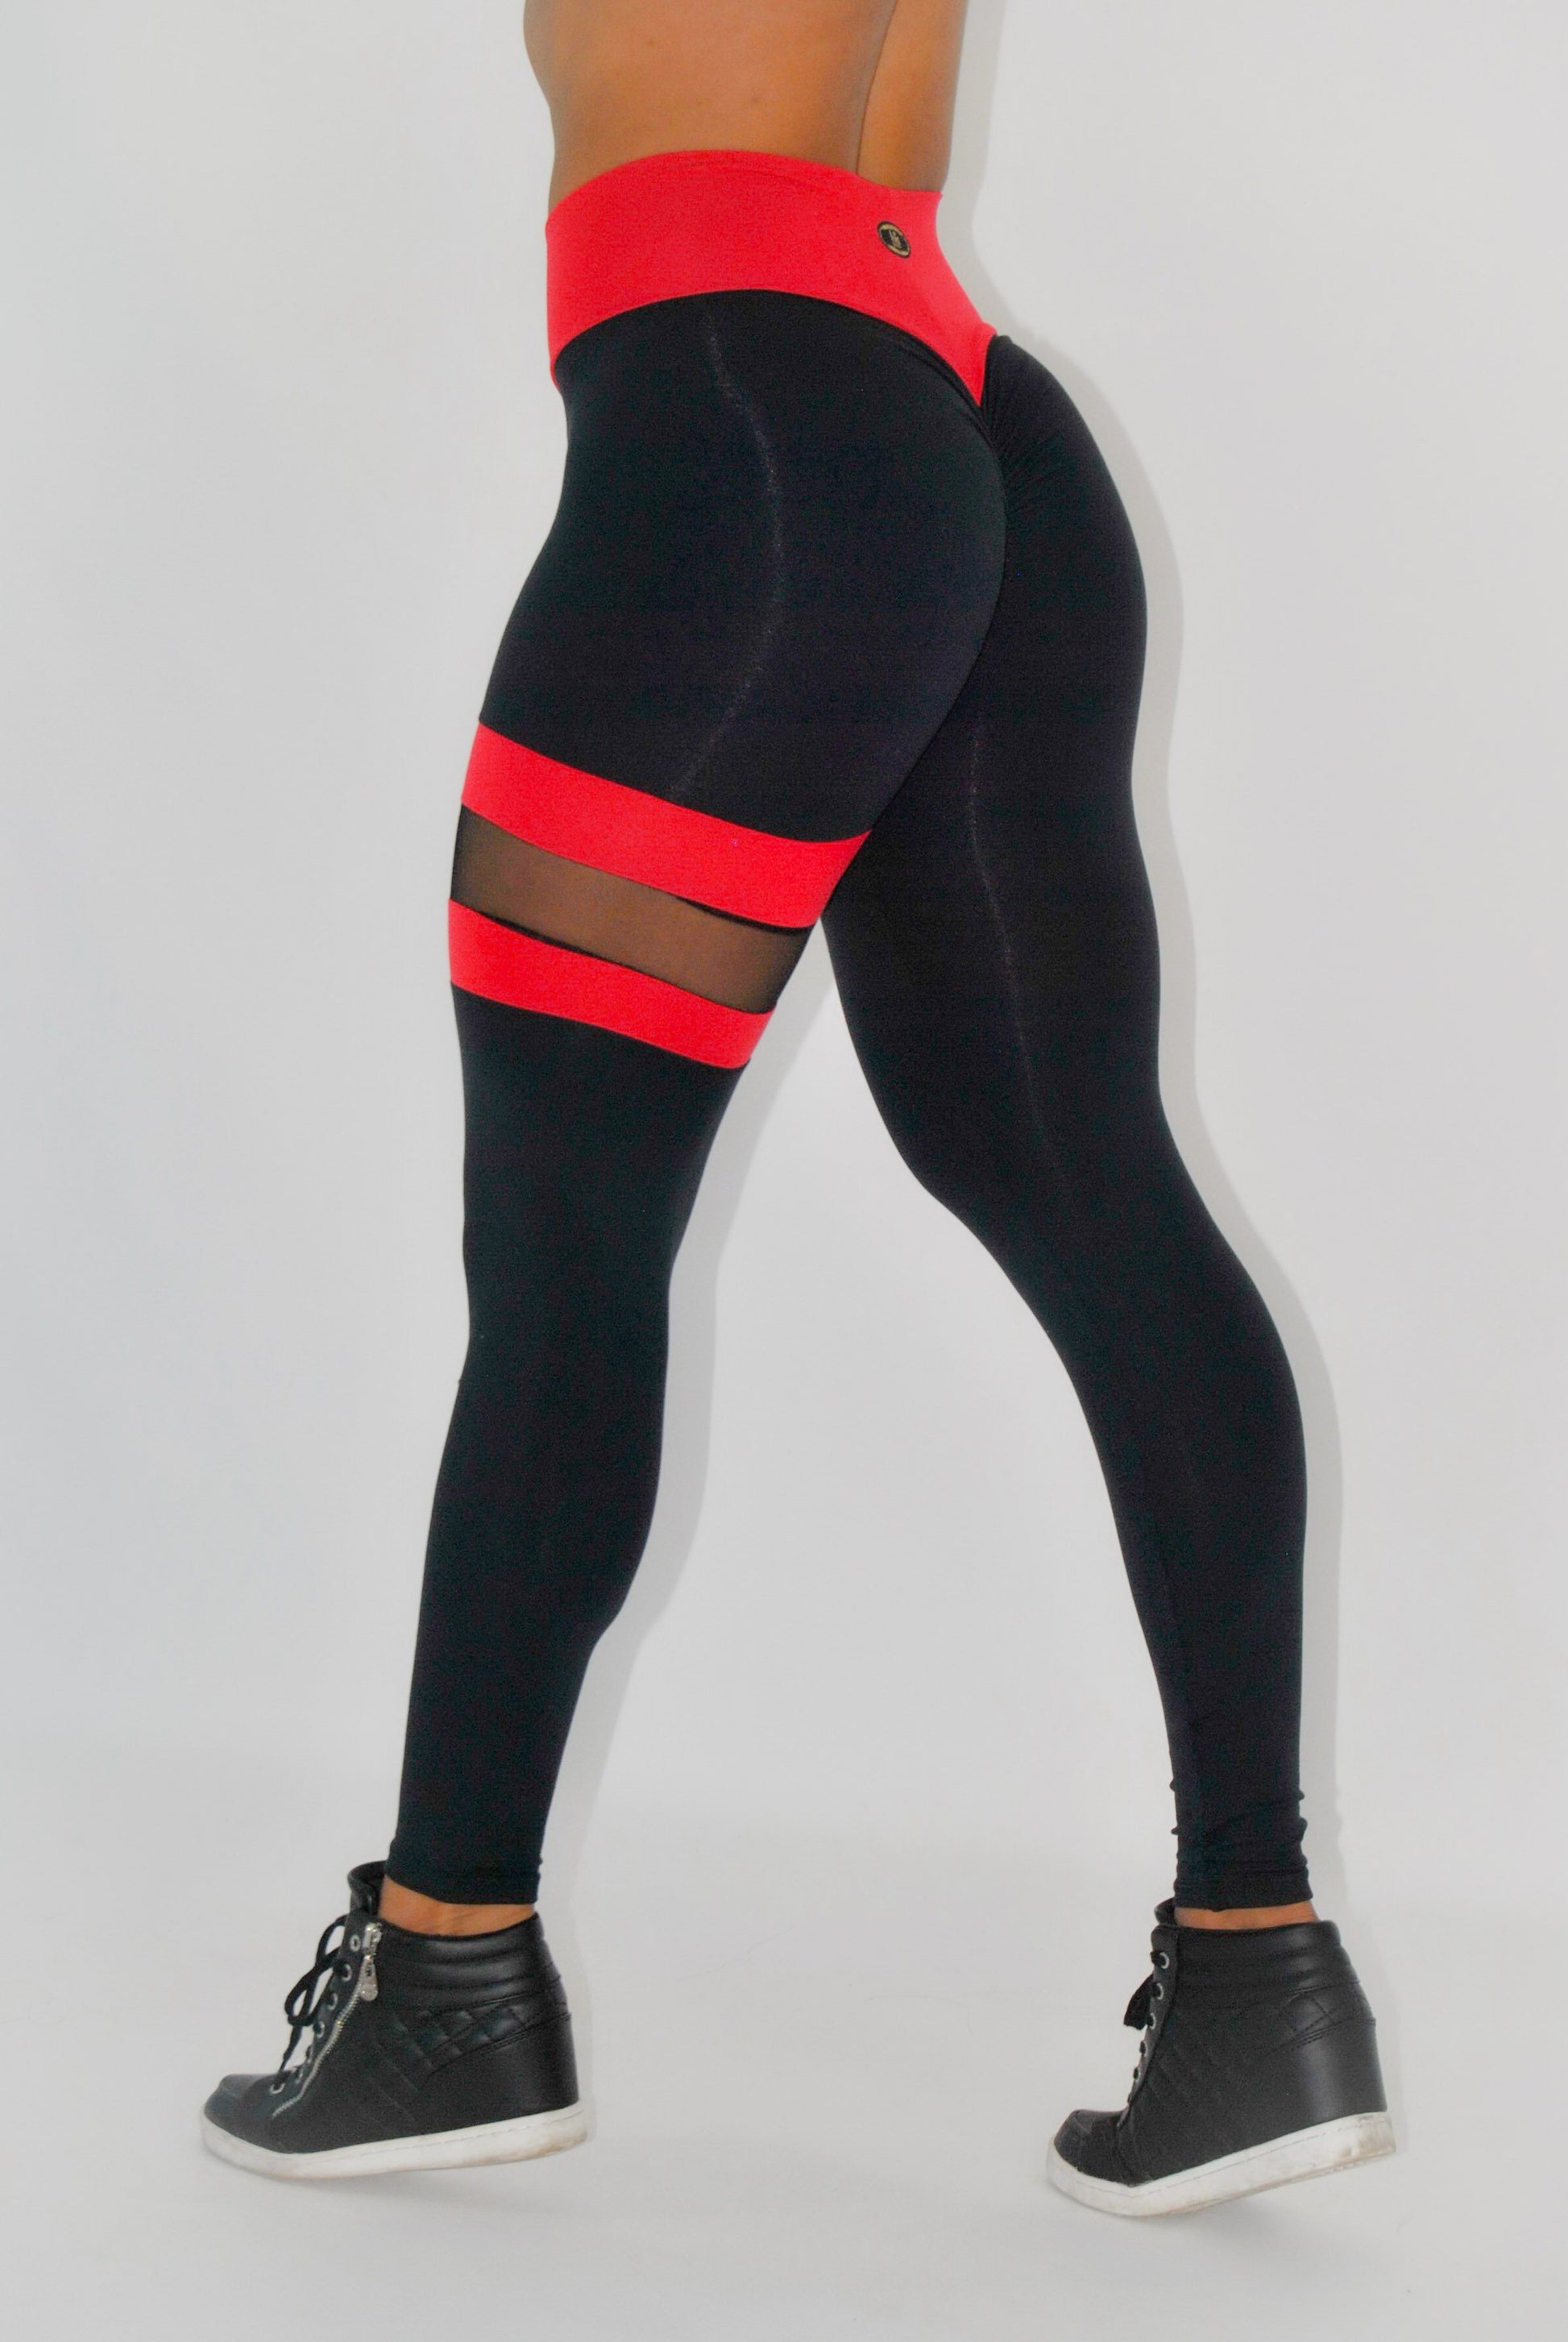 BUTT SCRUNCH LEG BAND RED AND BLACK LEGGINGS - Iris Fitness home of good quality leggings with really good prices